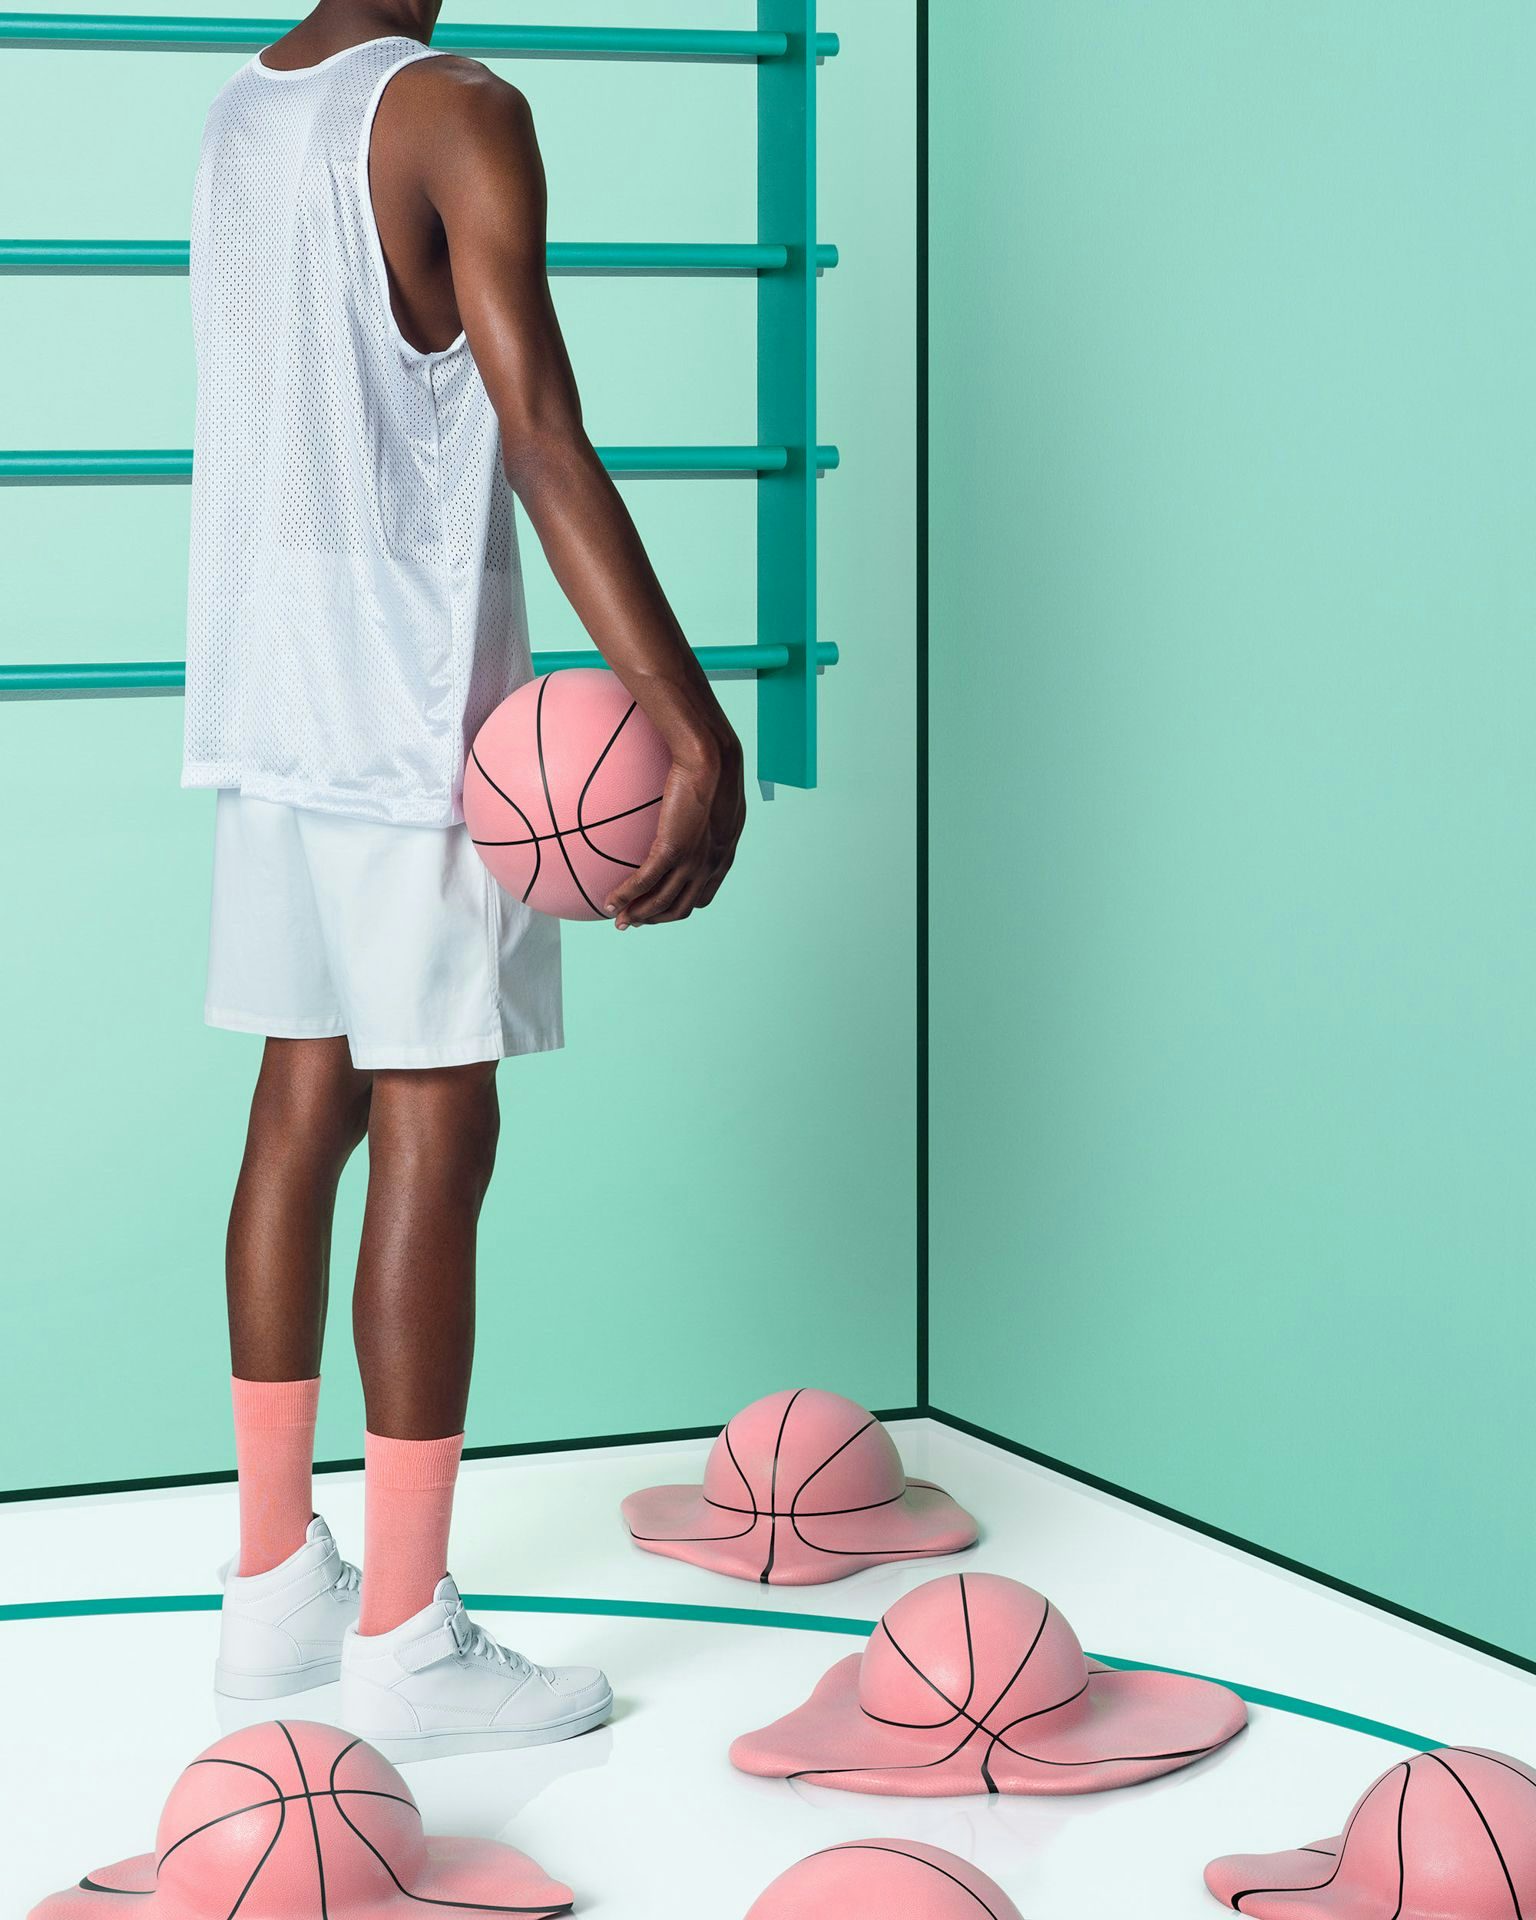 A basketball player stands, holding a ball, amidst deflated pink basketballs on a turquoise floor with a matching backdrop.